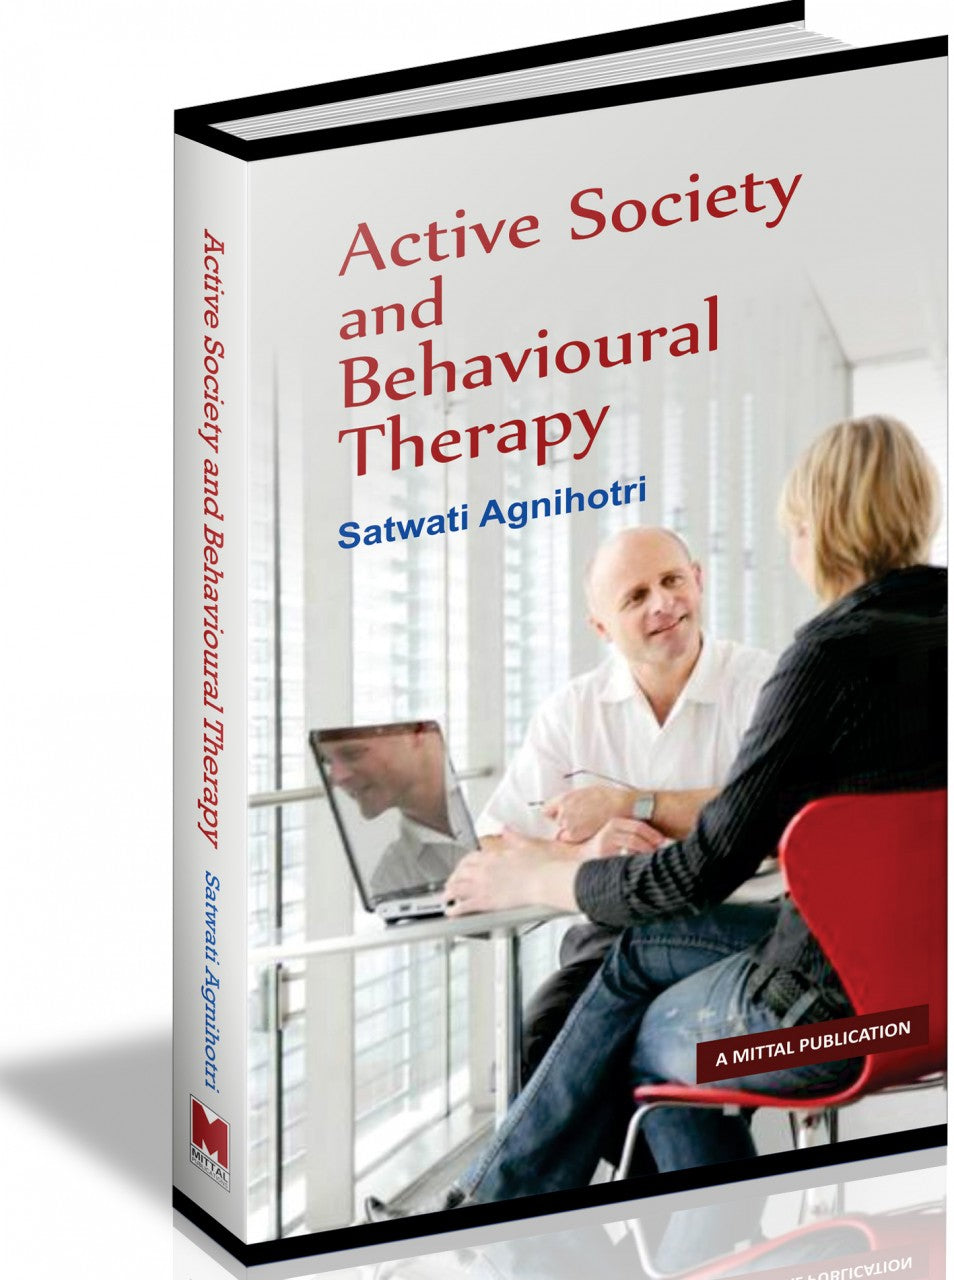 Active Society and Behavioural Therapy